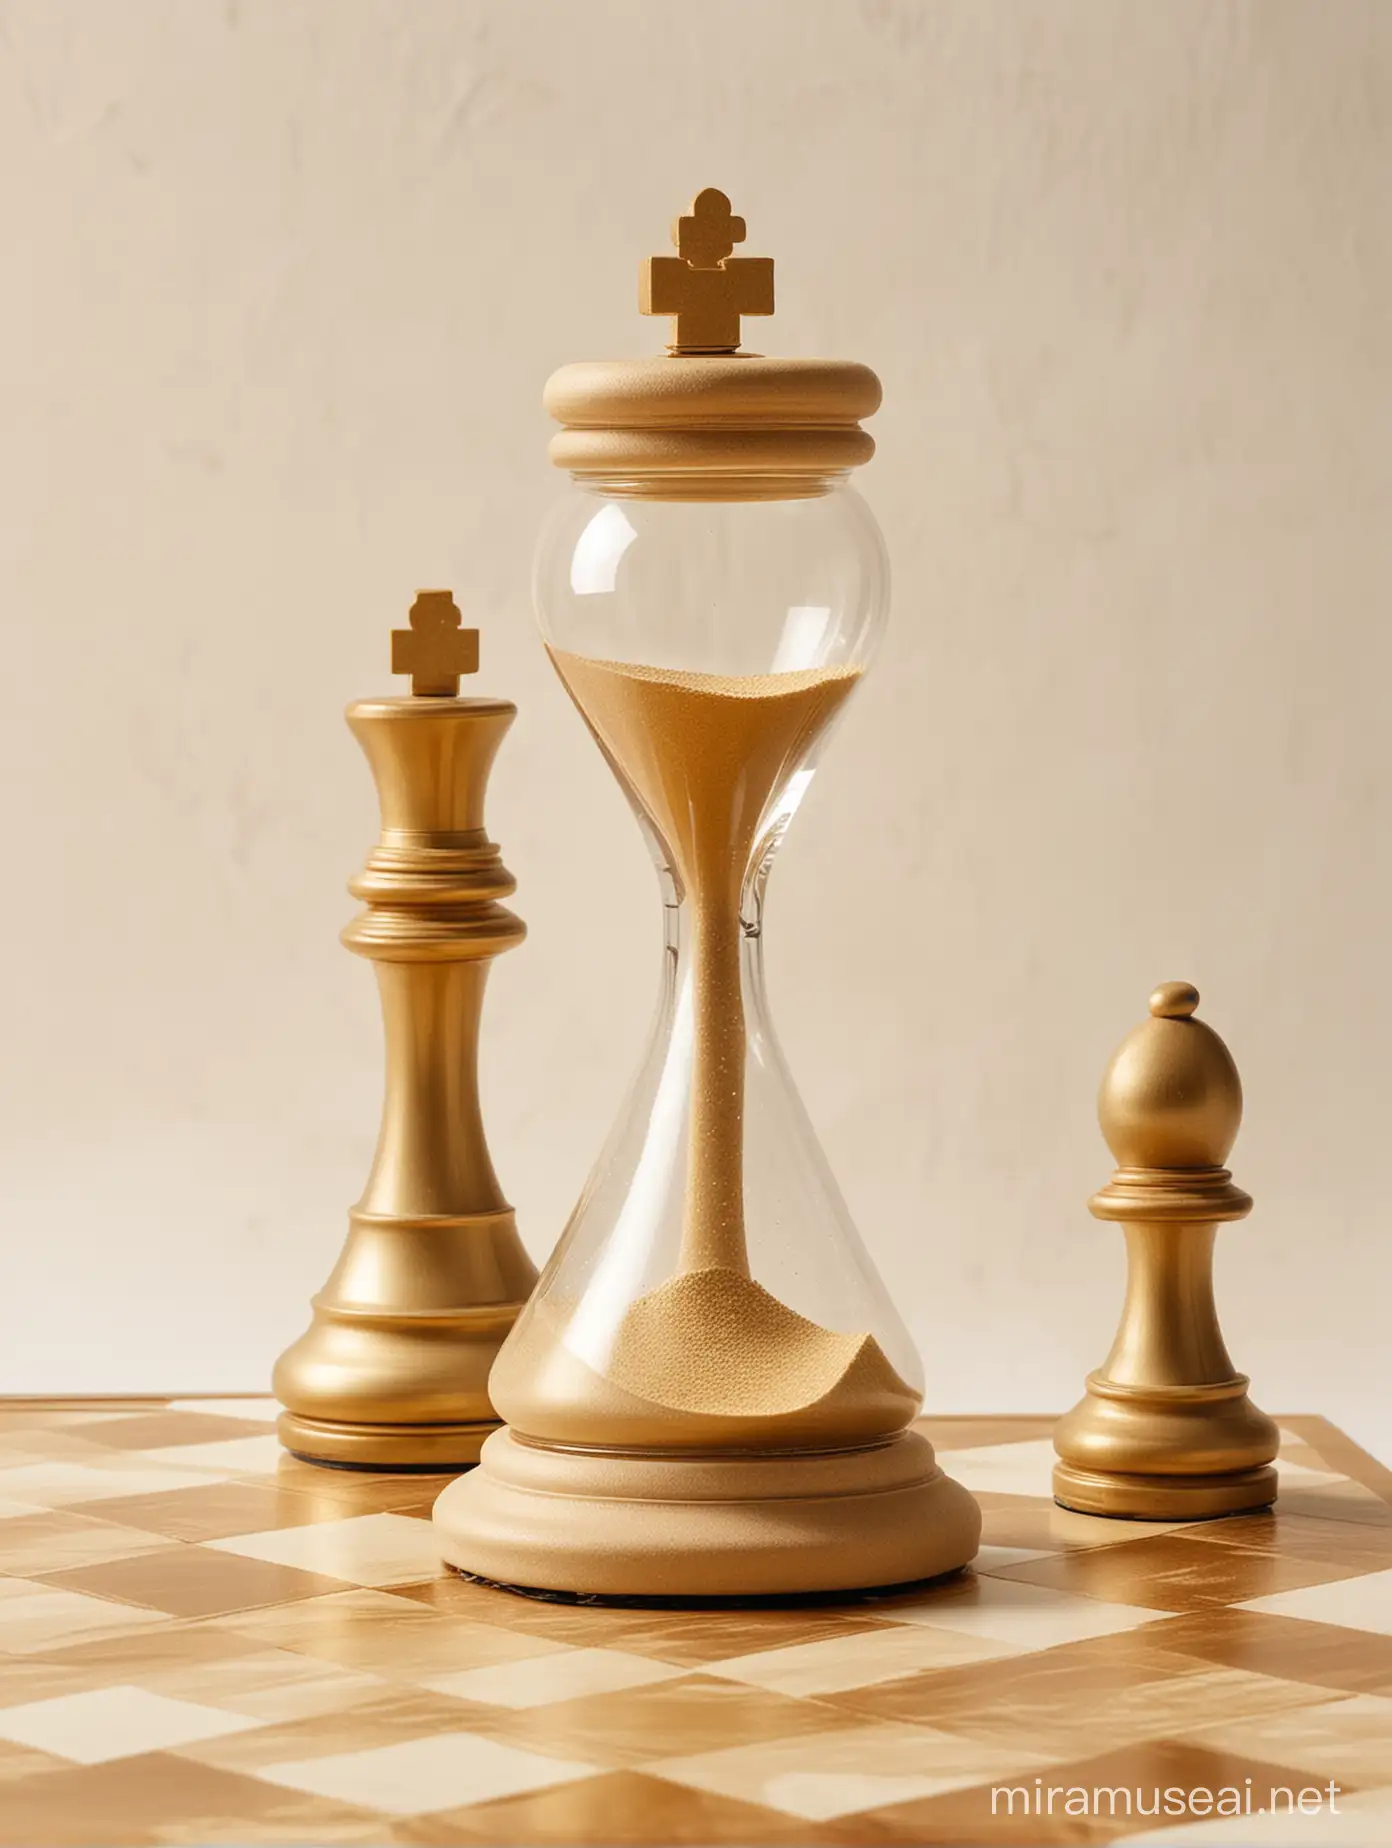 Glass Hourglass on Golden and White Chessboard with King Piece